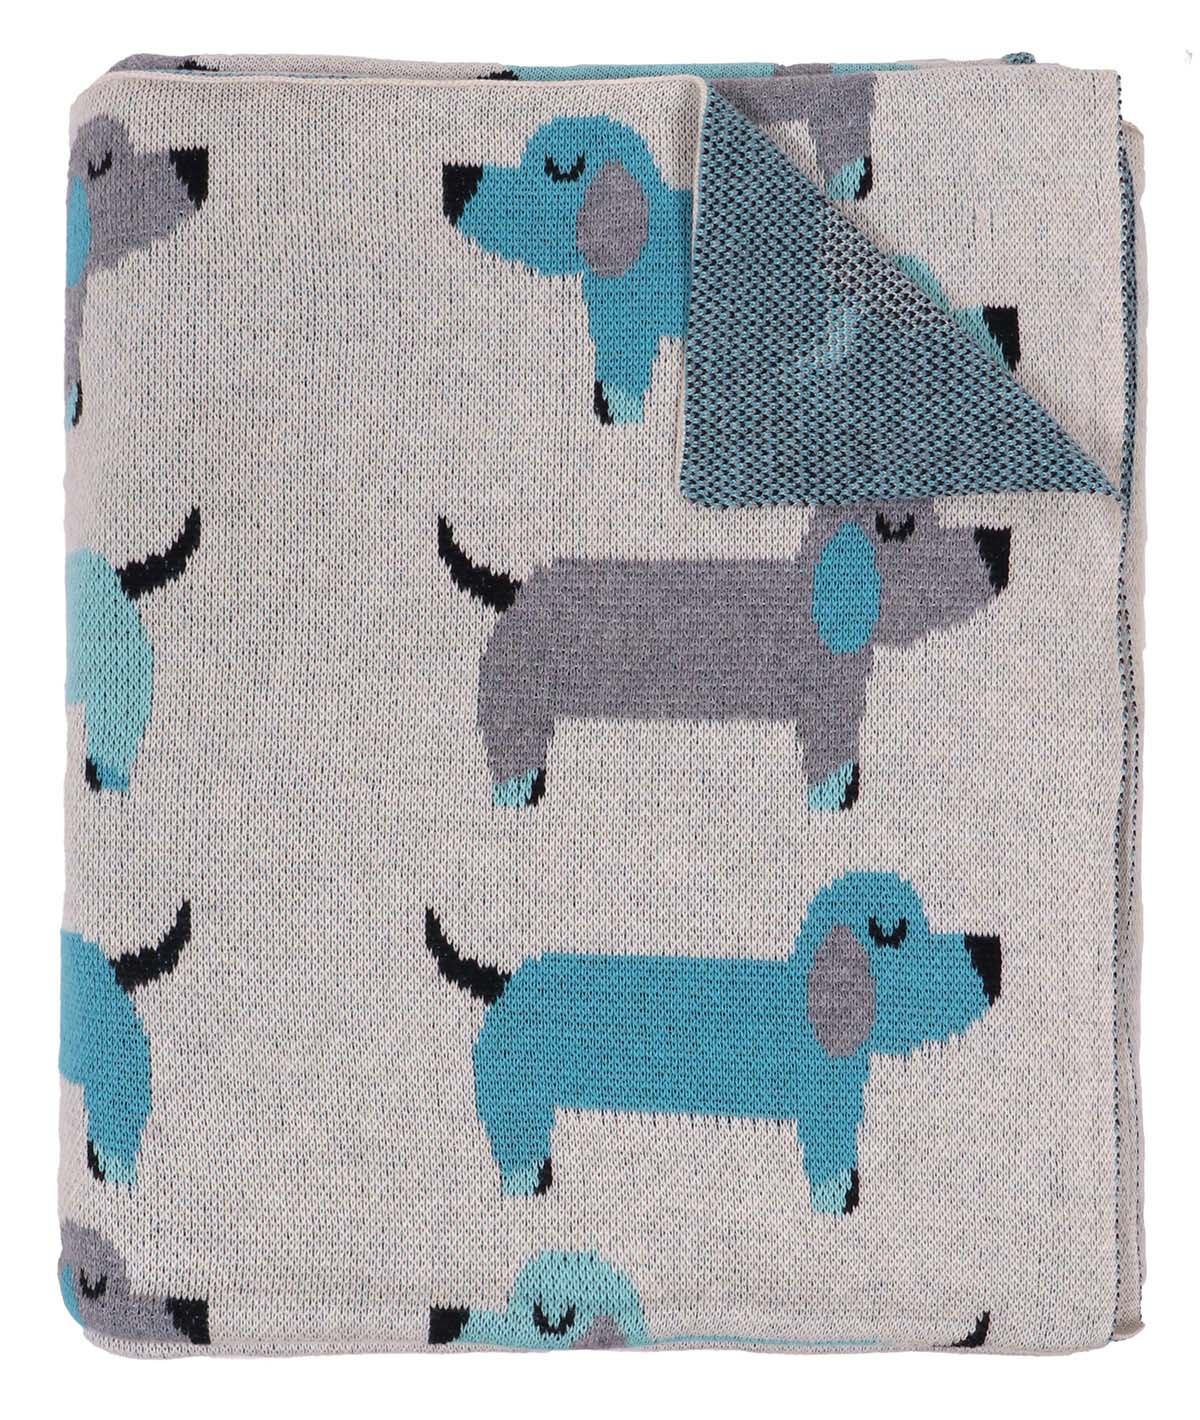 Scottie Dog - Natural 100% Cotton Knitted All Season AC Blanket for Kids